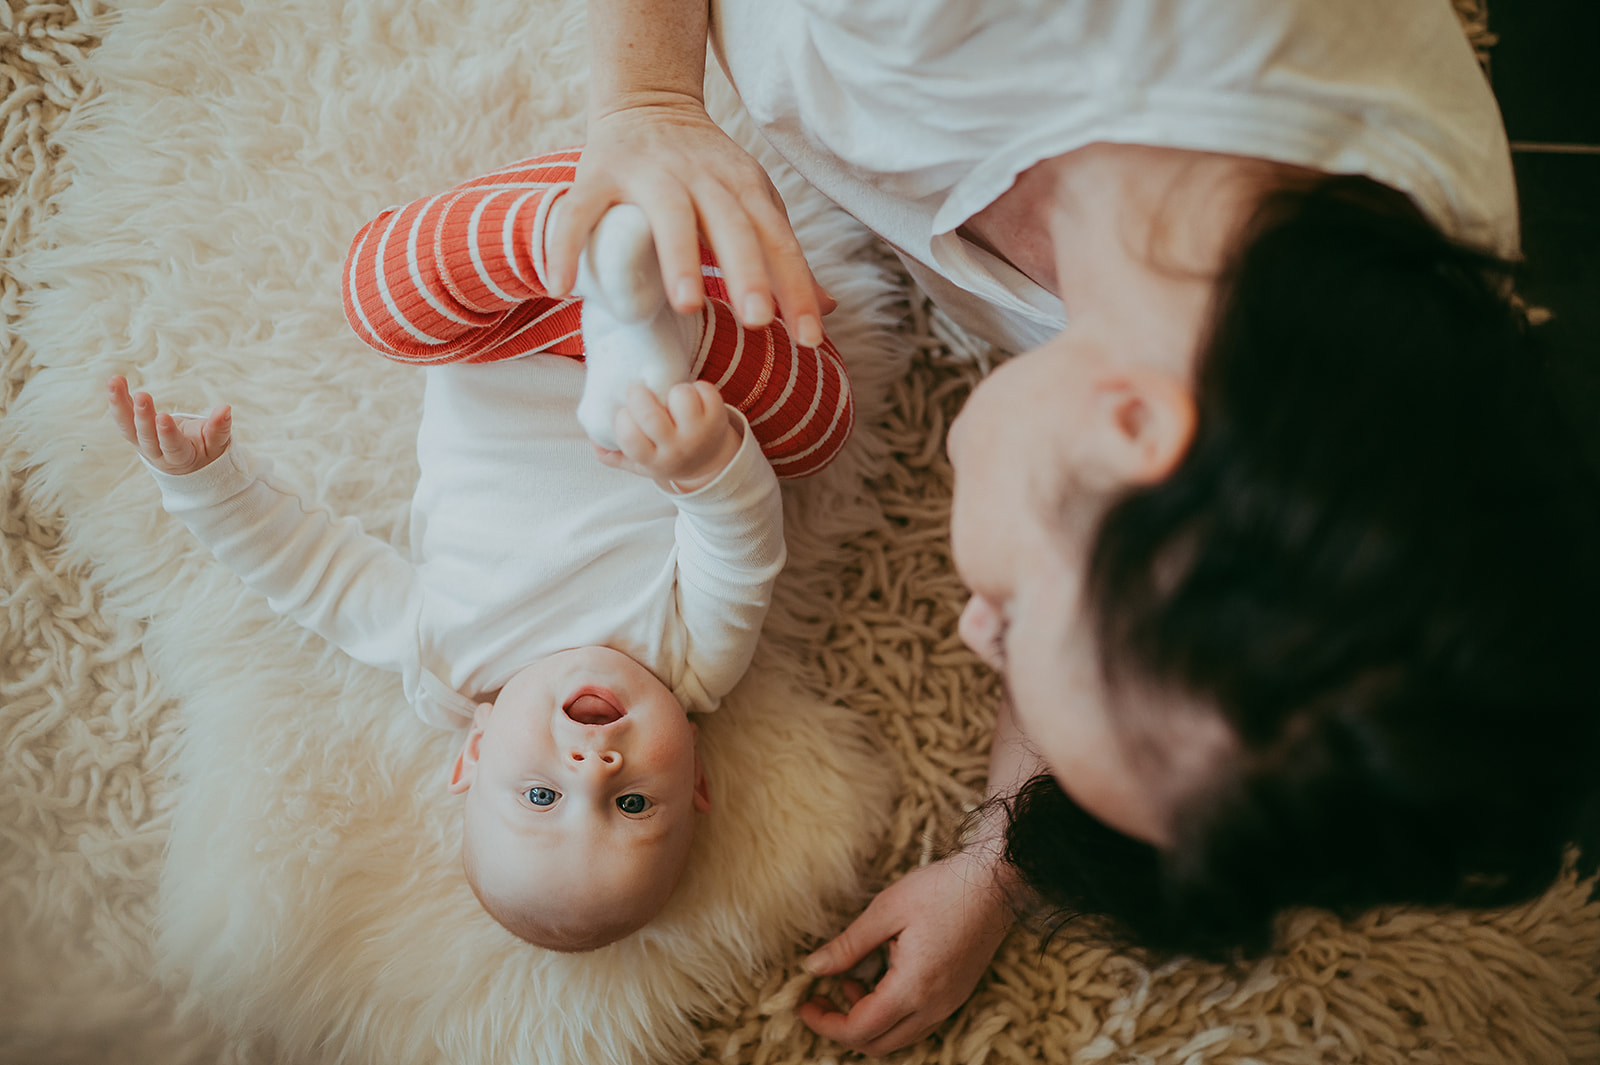 baby laughing on sheepskin rug with mother